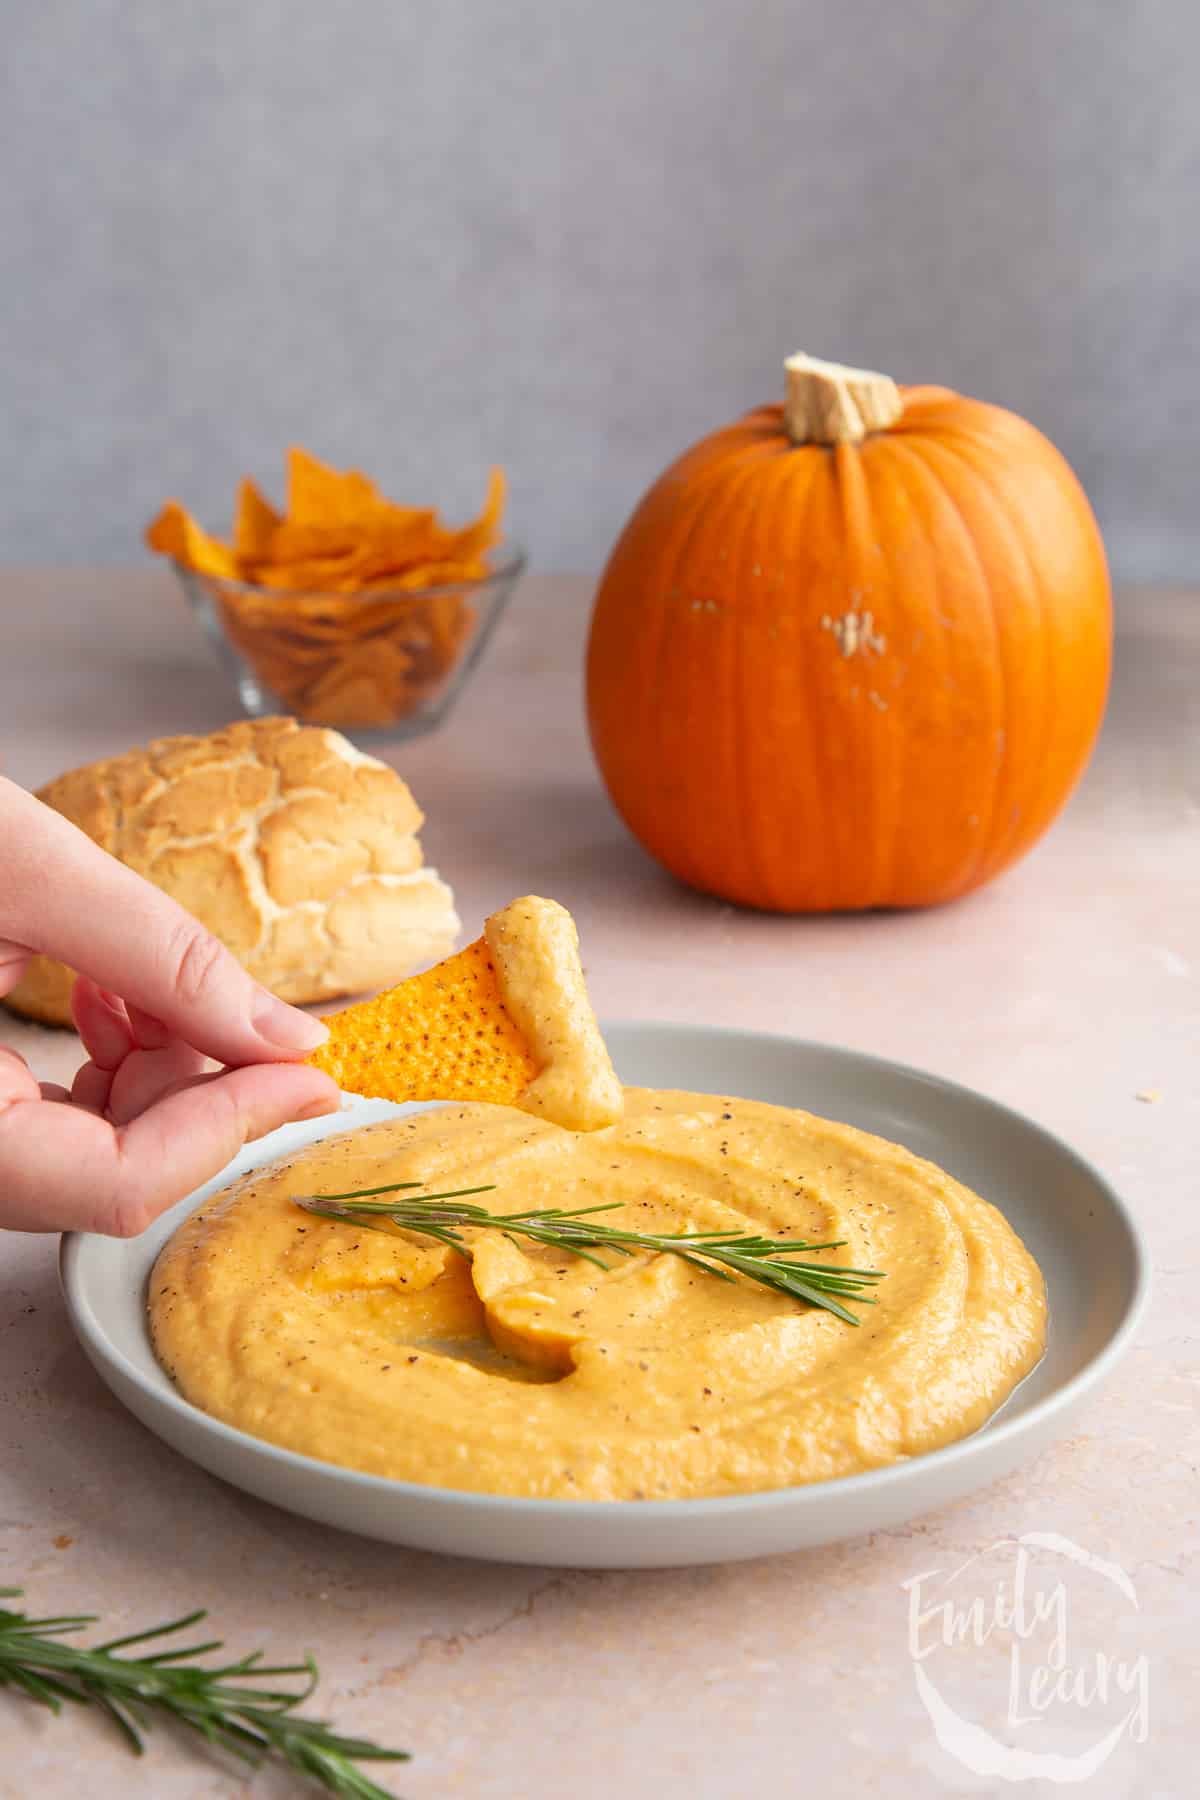 Vegan pumpkin dip in a shallow grey bowl with a sprig of rosemary. A hand holds a tortilla chip that has been dipped into it.